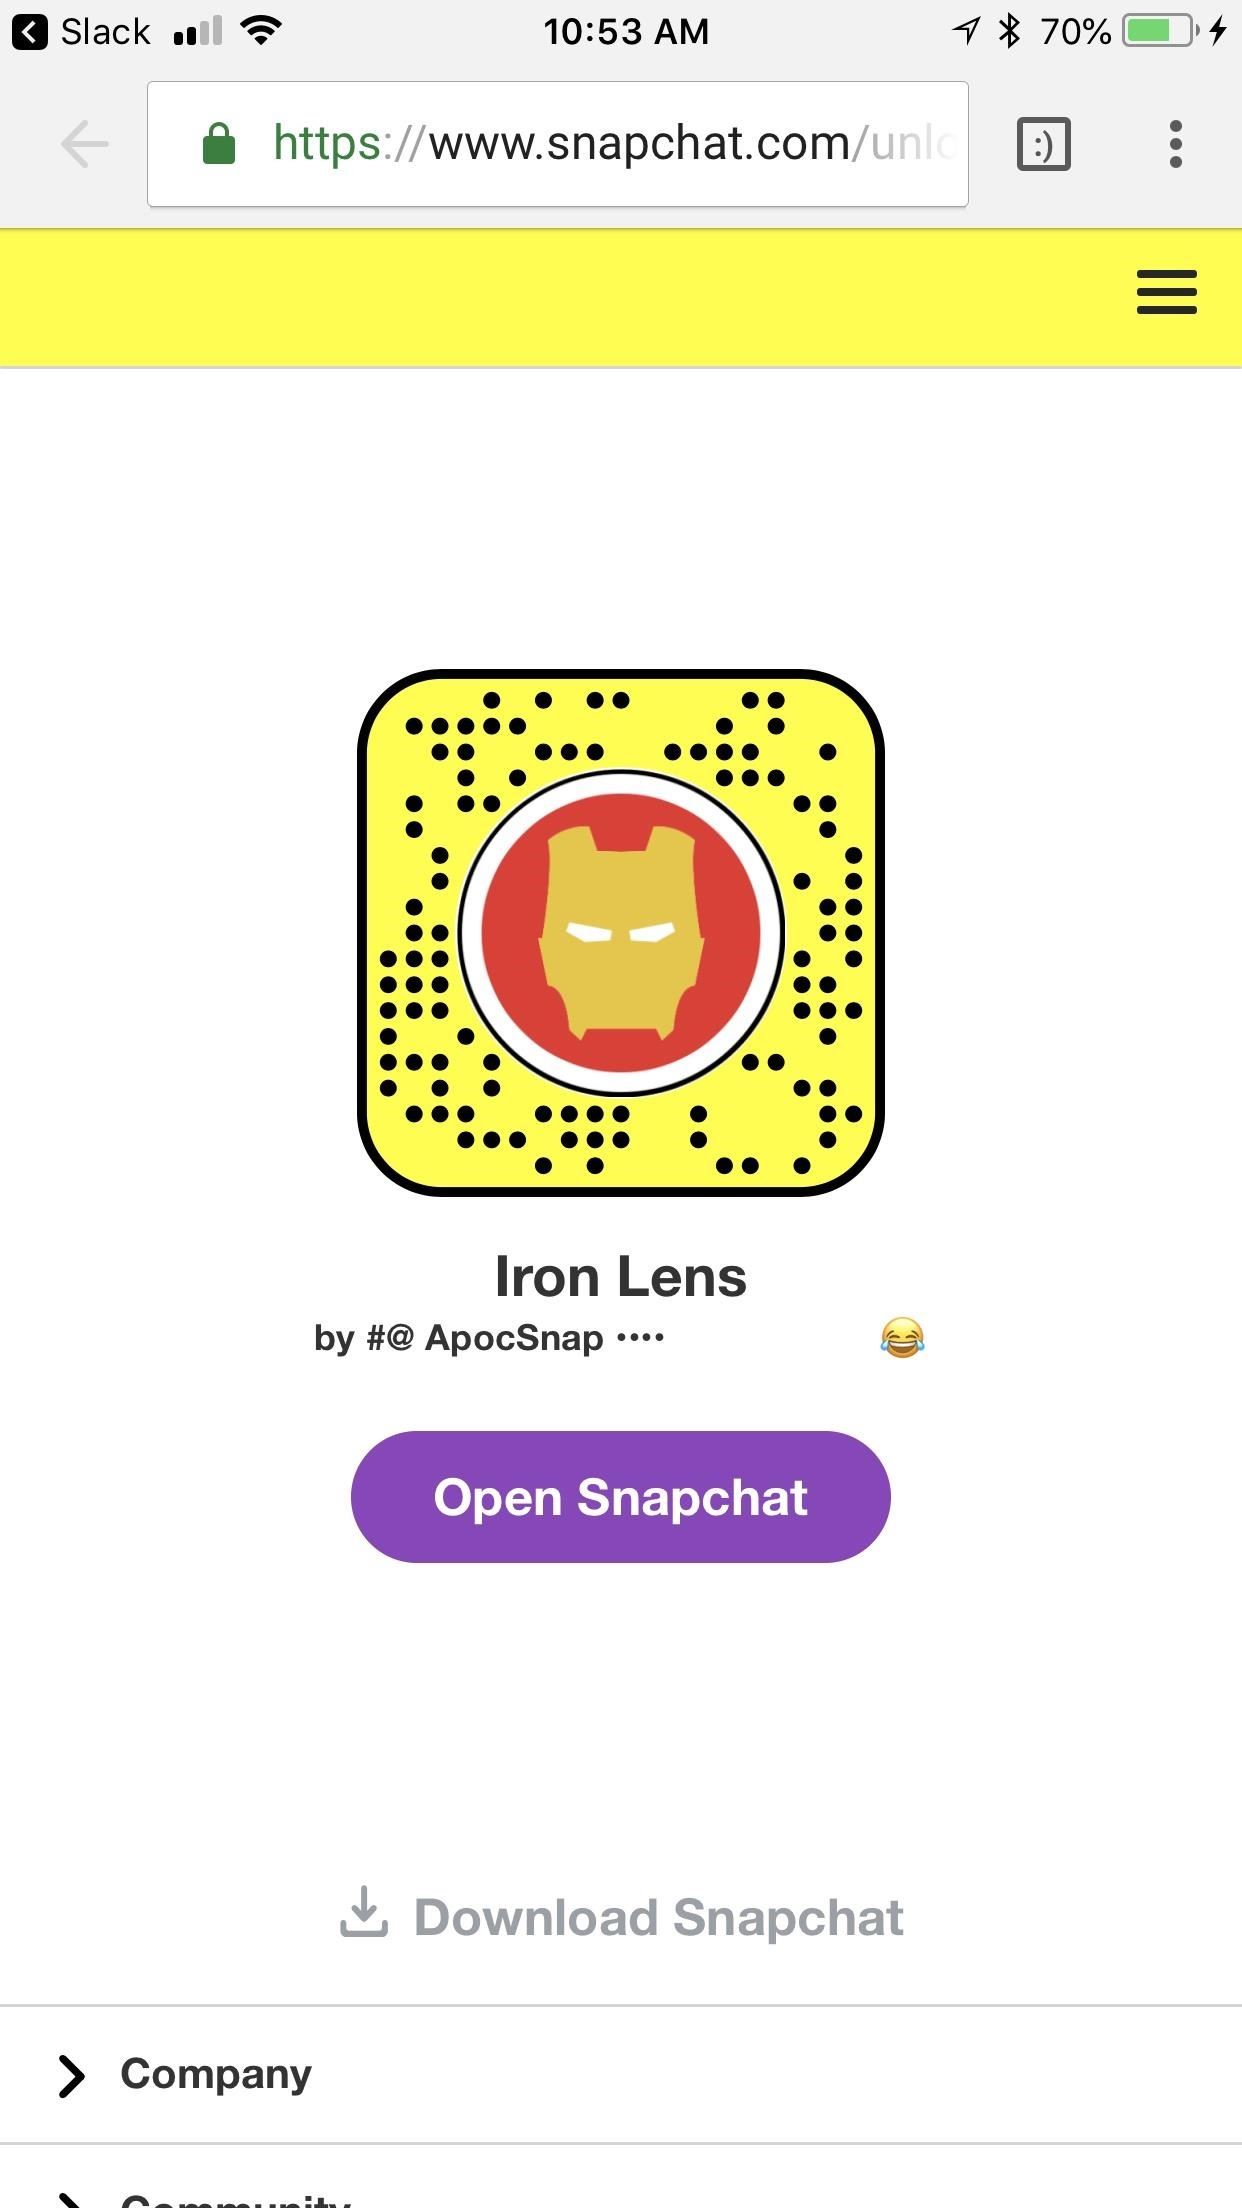 Try These 5 Hot New Snapchat Lenses — Iron Man, iDubbz & More